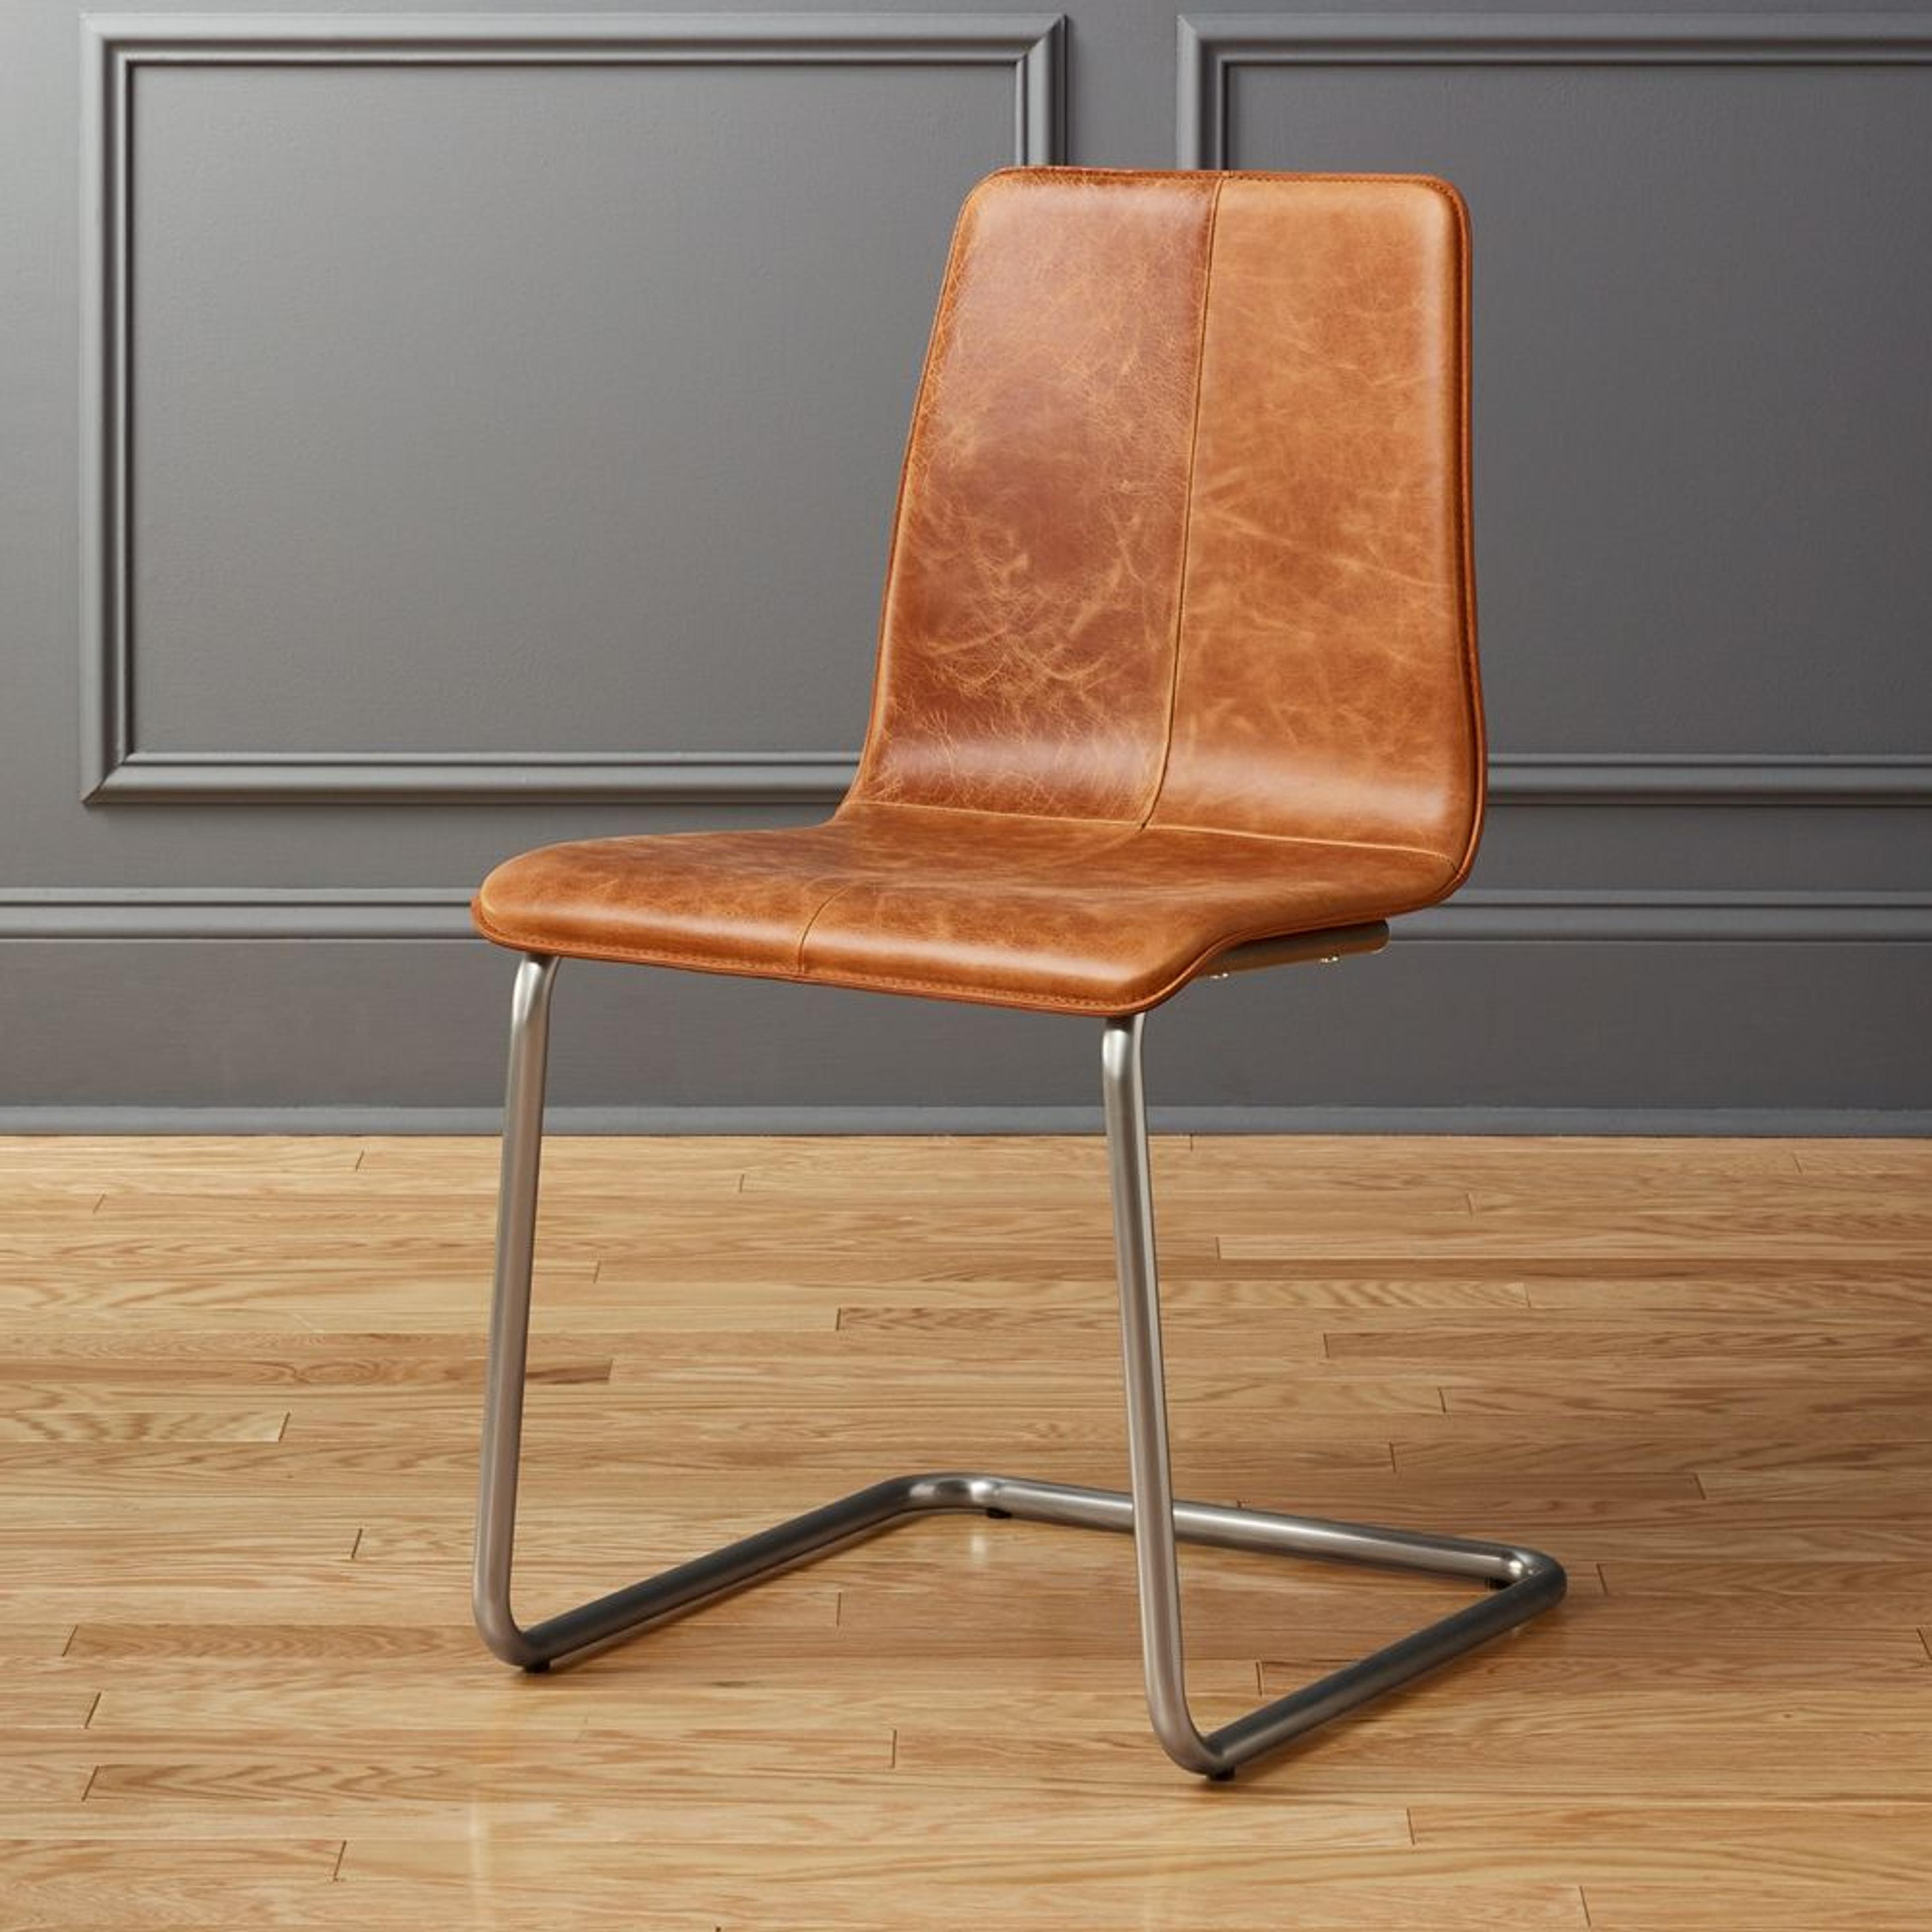 Pony Leather Chair